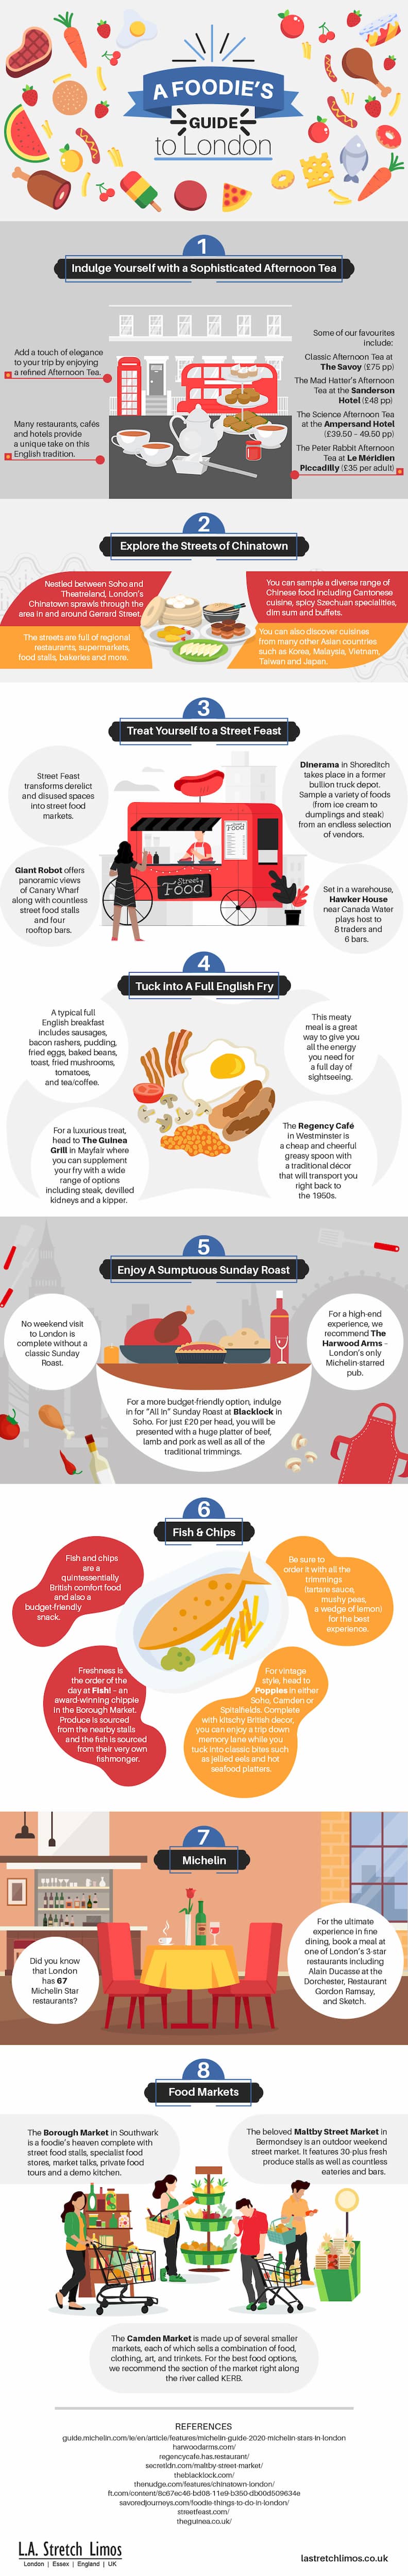 foodie guide to london infographic